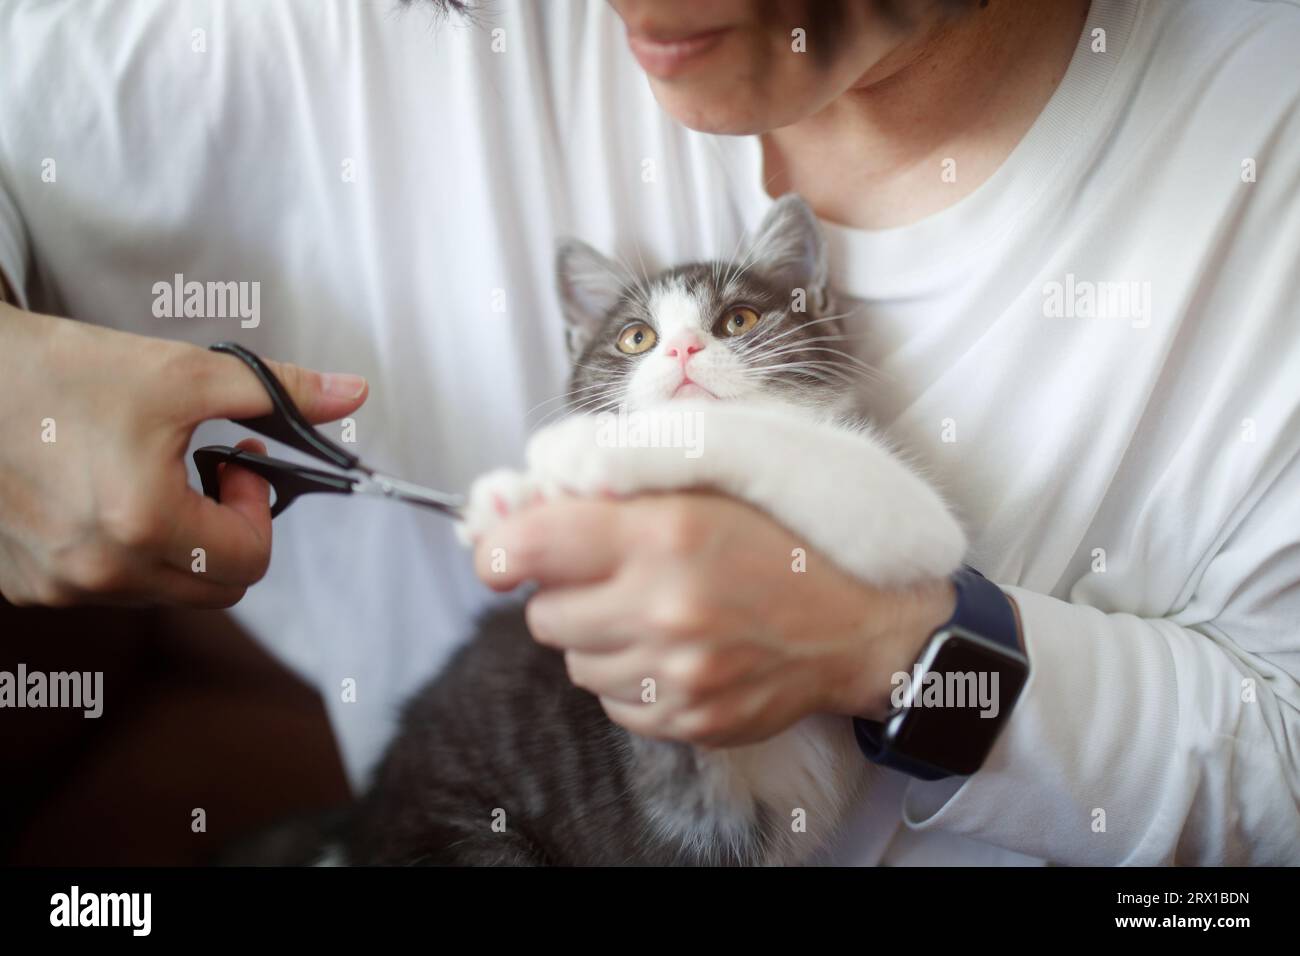 How do cats feel about having their nails clipped? What is the best way to  trim a cat's nails without them noticing or getting upset? - Quora